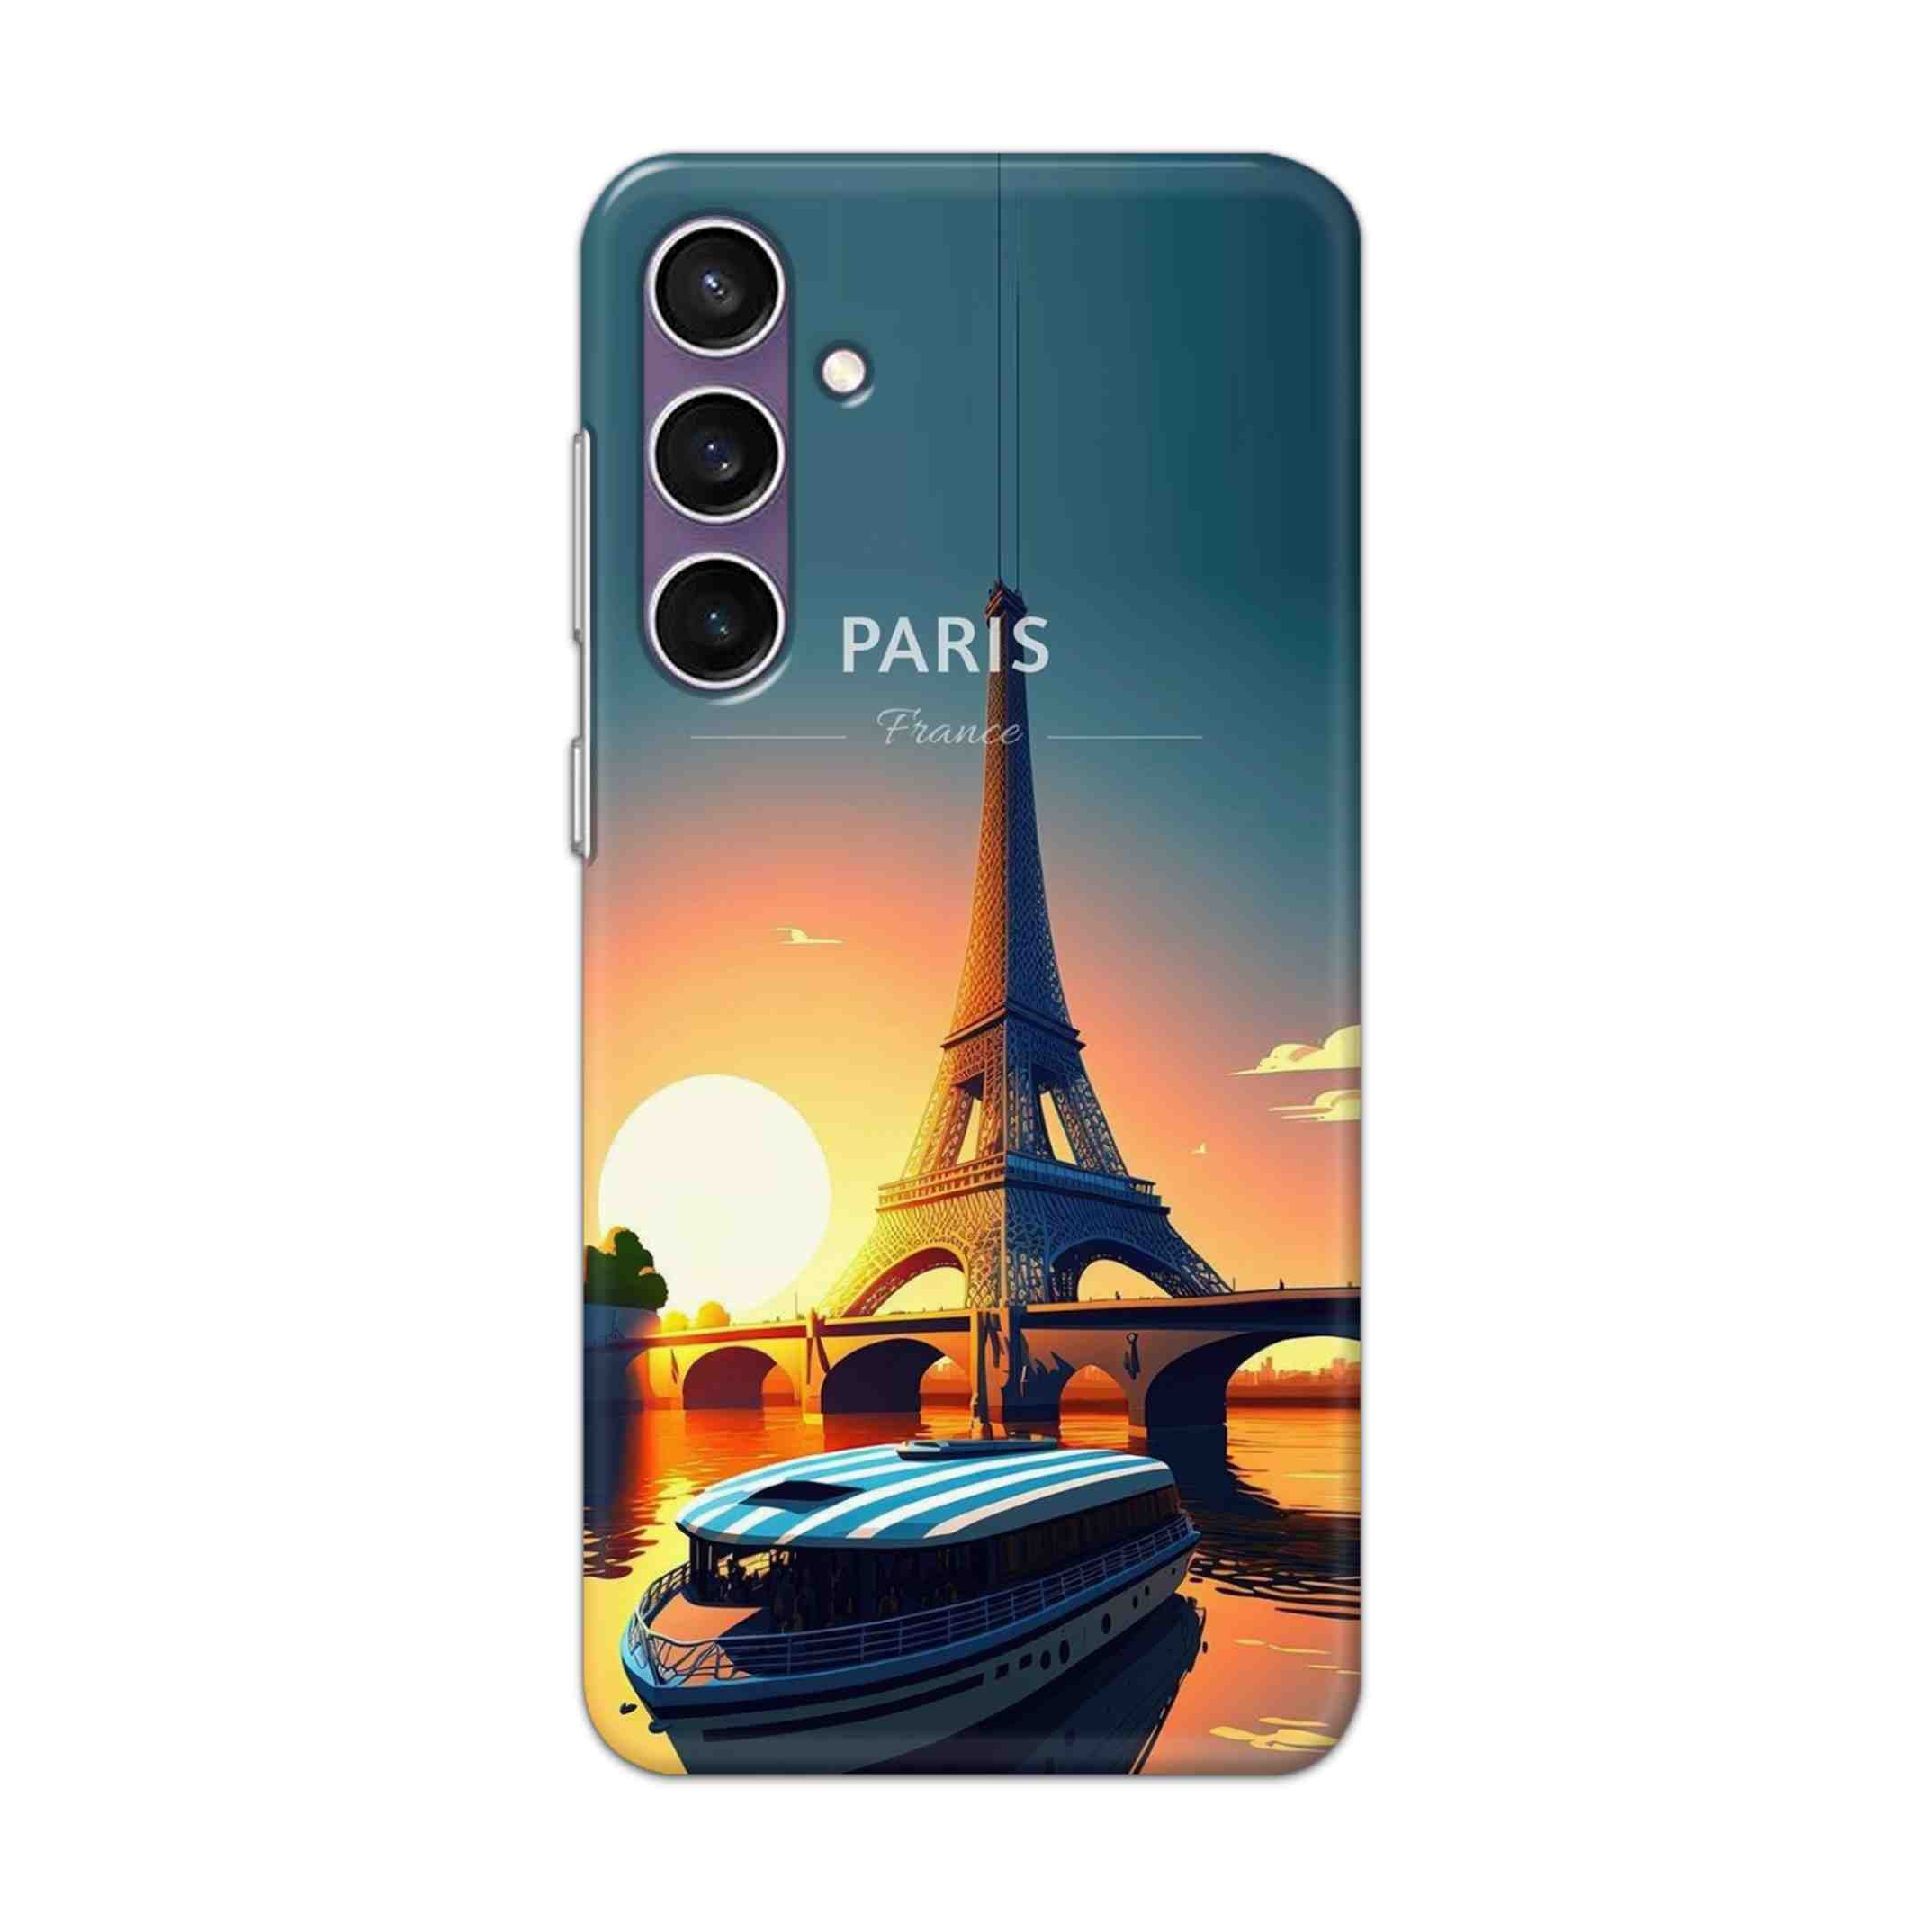 Buy France Hard Back Mobile Phone Case/Cover For SAMSUNG Galaxy S23 FE Online